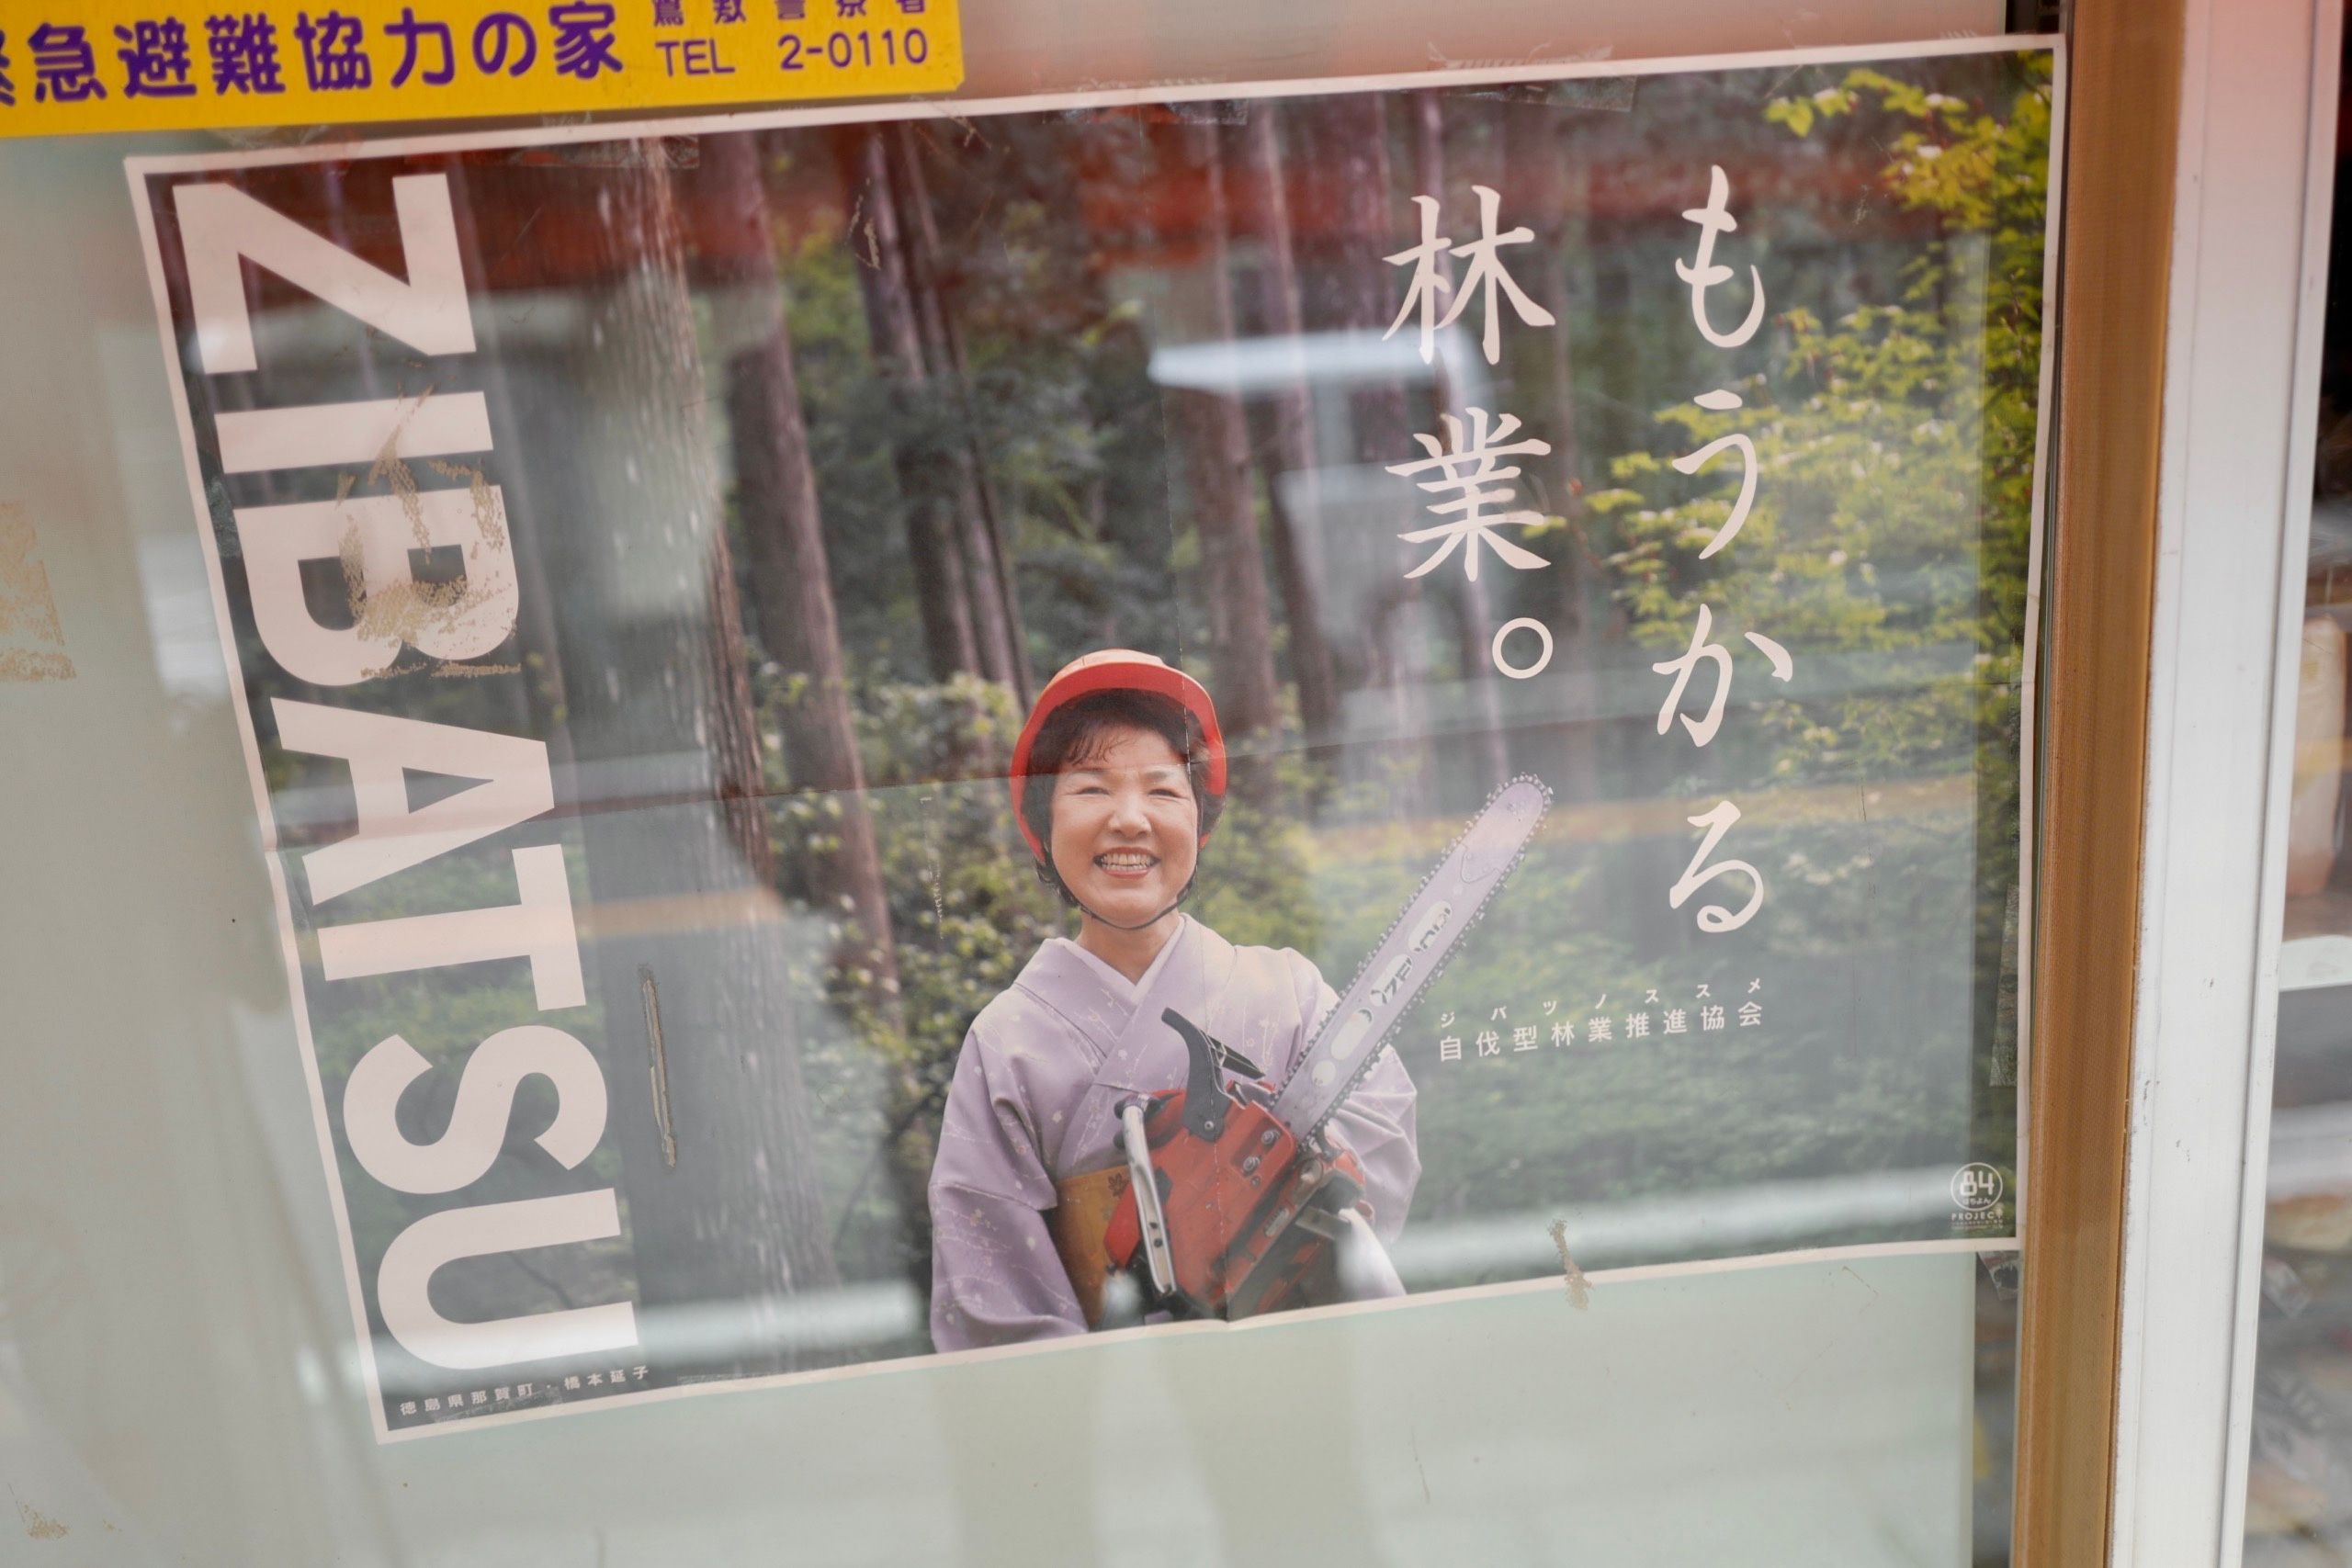 A poster of a smiling woman holding a chainsaw, wearing a red helmet and a pink kimono.